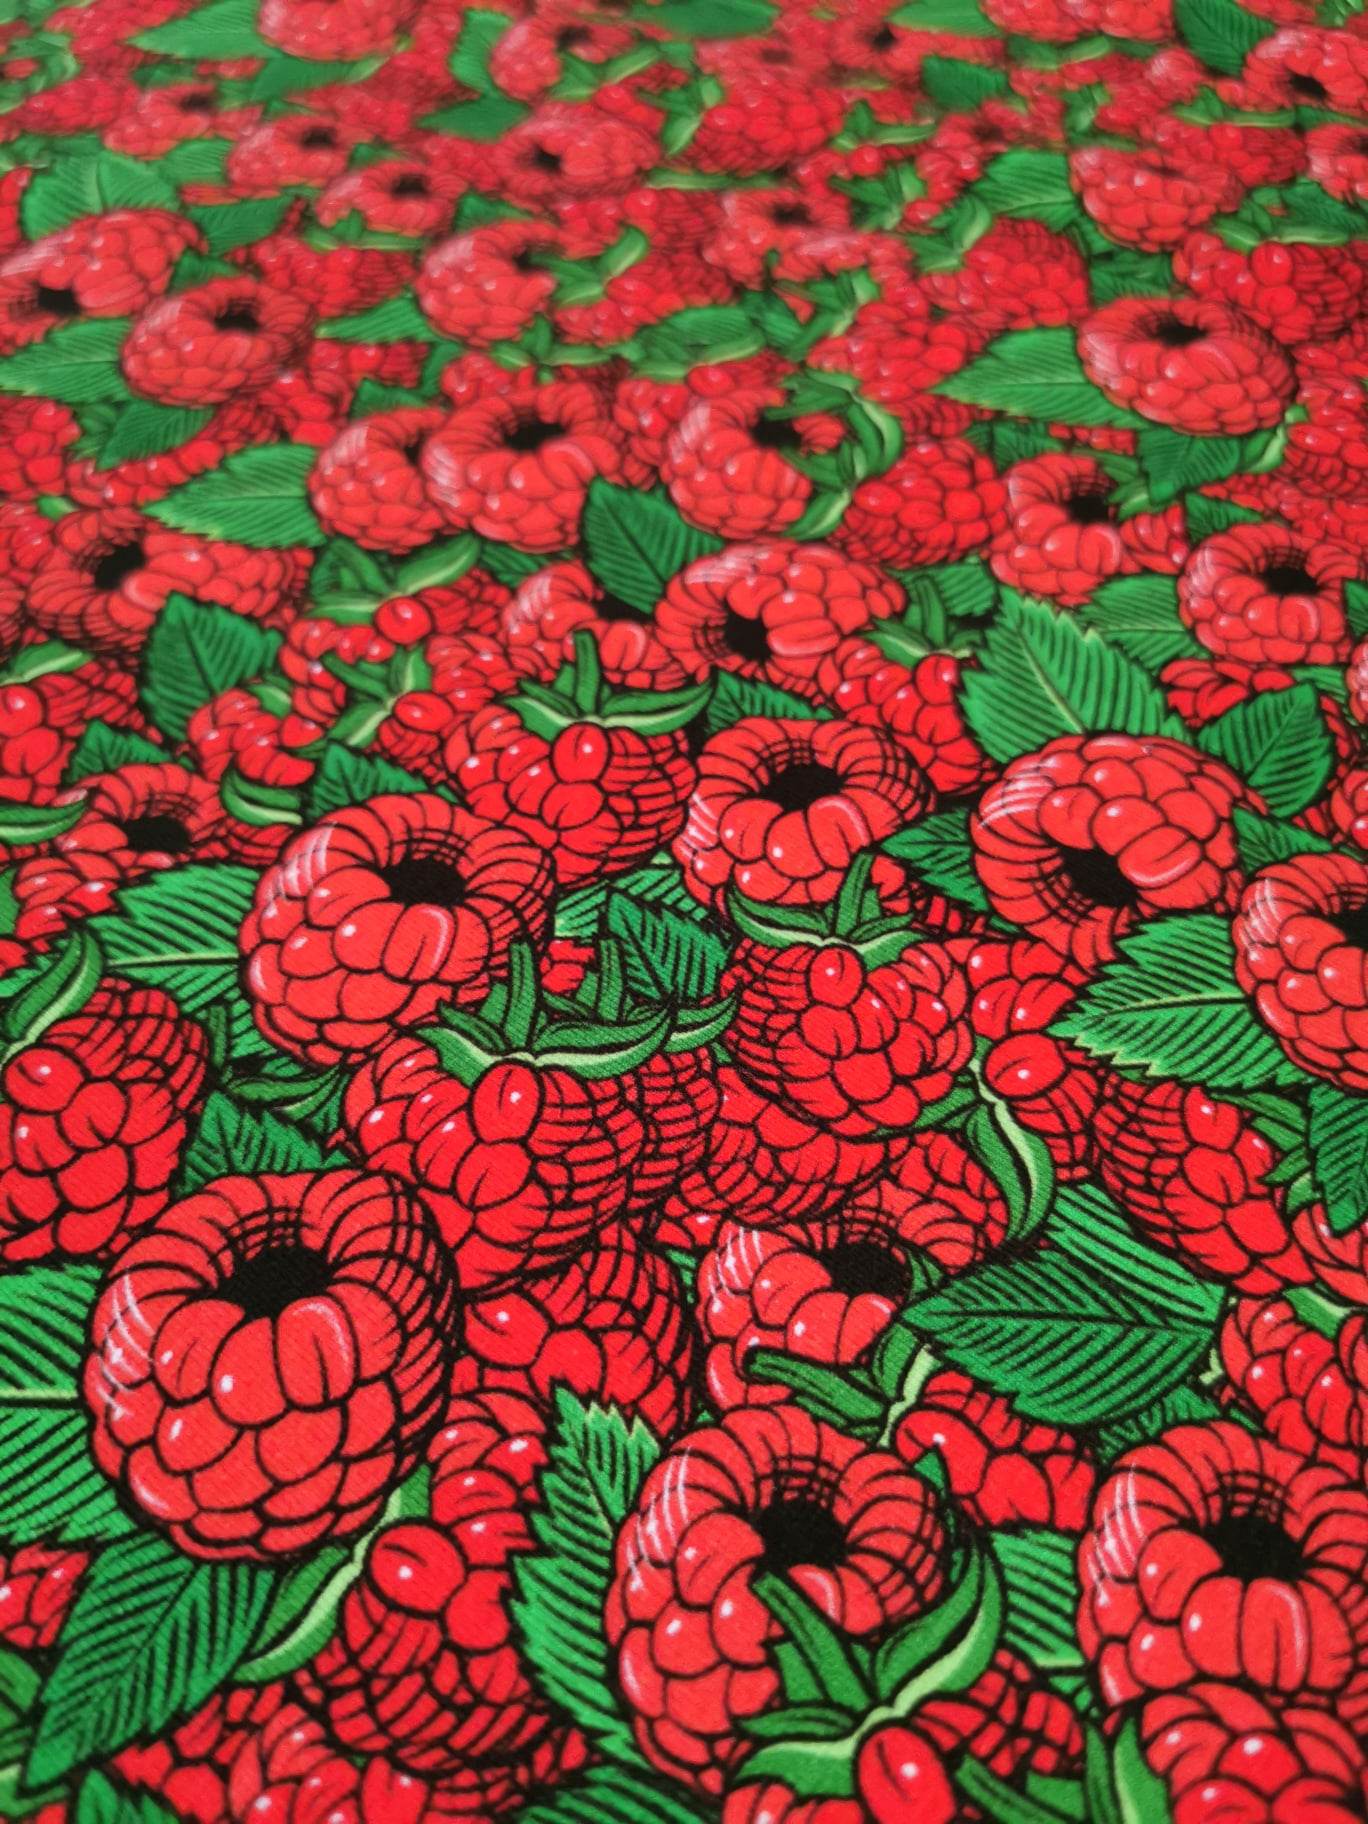 Red Raspberry summer fruit on stretch cotton lycra jersey fabric for sewing your own clothes.